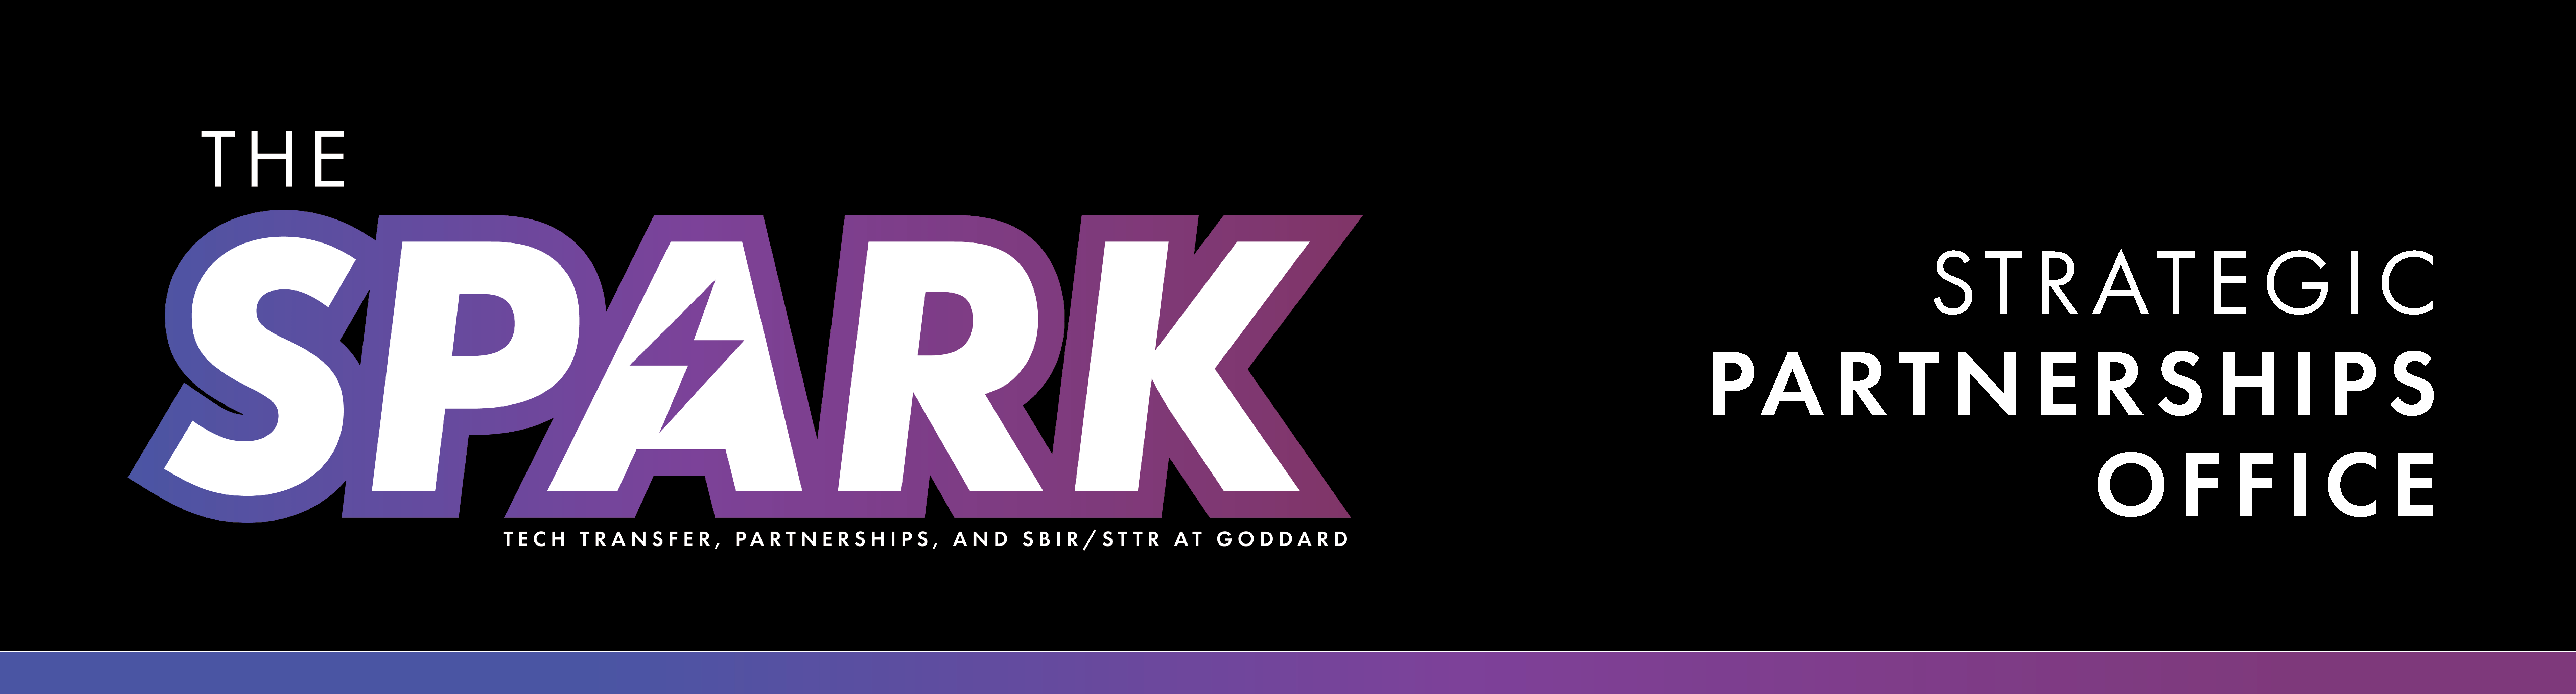 The banner for The Spark.